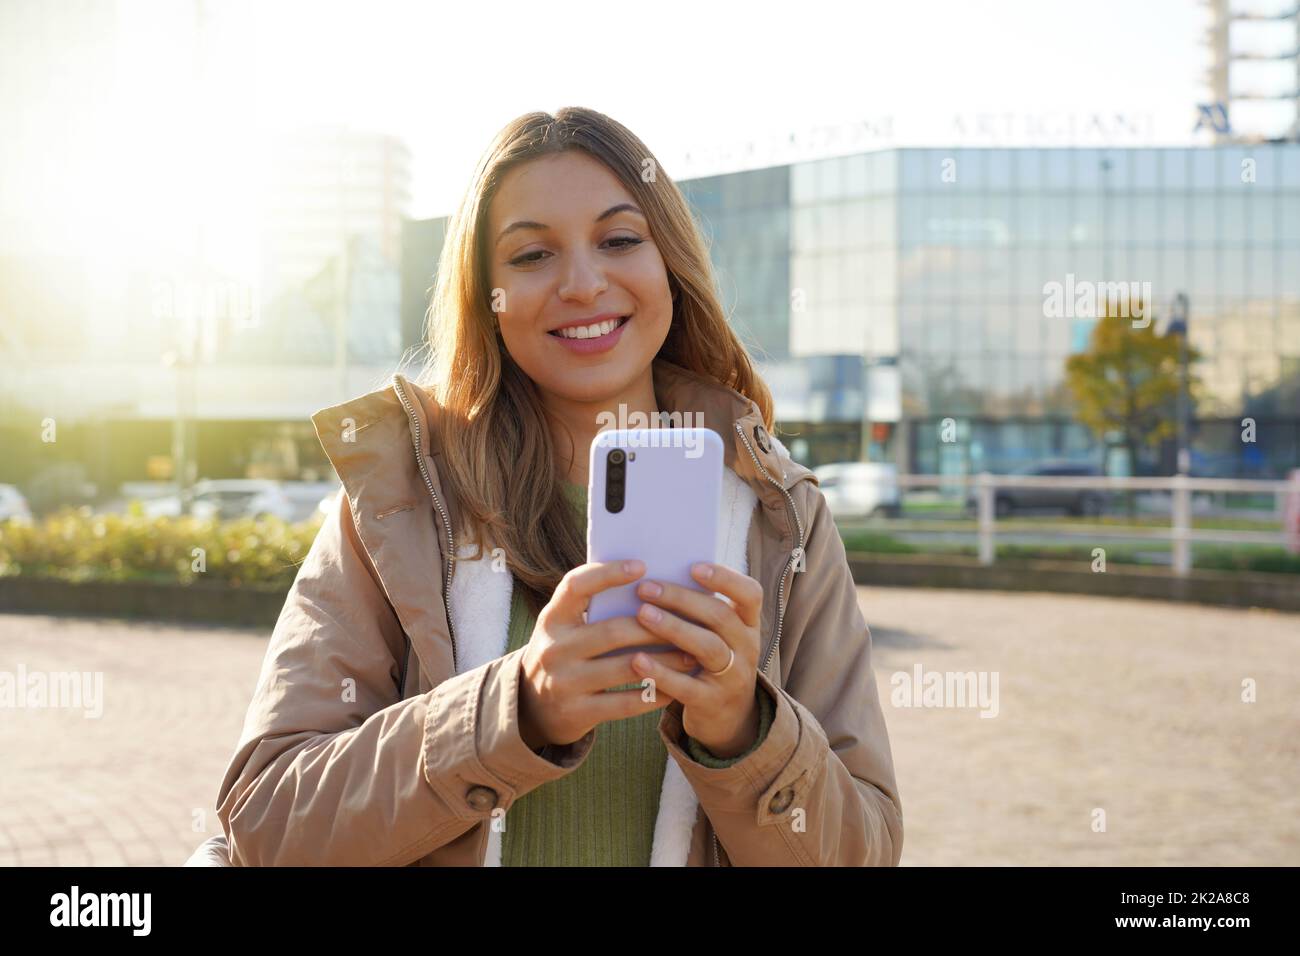 Smiling girl in winter clothes using phone in the city Stock Photo